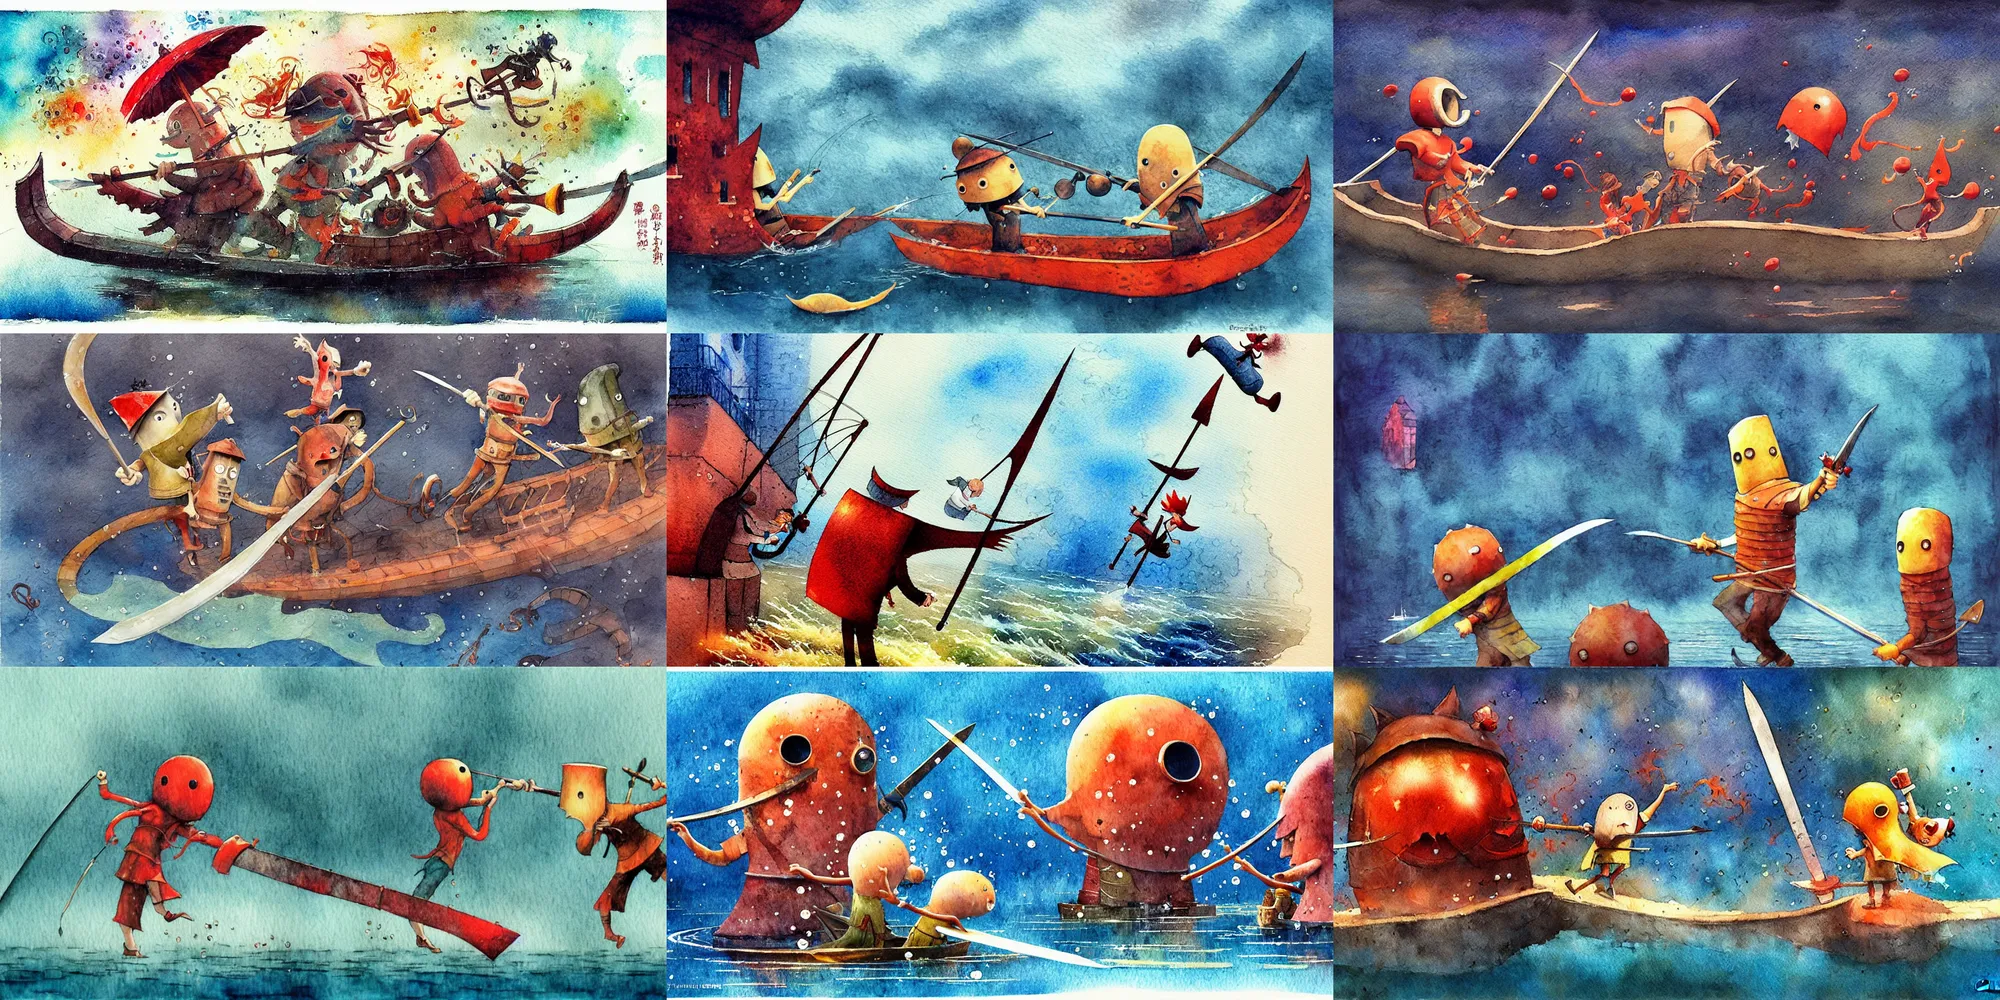 Prompt: ! movie scene, by shaun tan, by nohisa inoue, characters, waterway, action photography, gondola, sword fight, splash, amazing composition, colorful ( ( watercolor ) ), illustration, gloomy, vignette